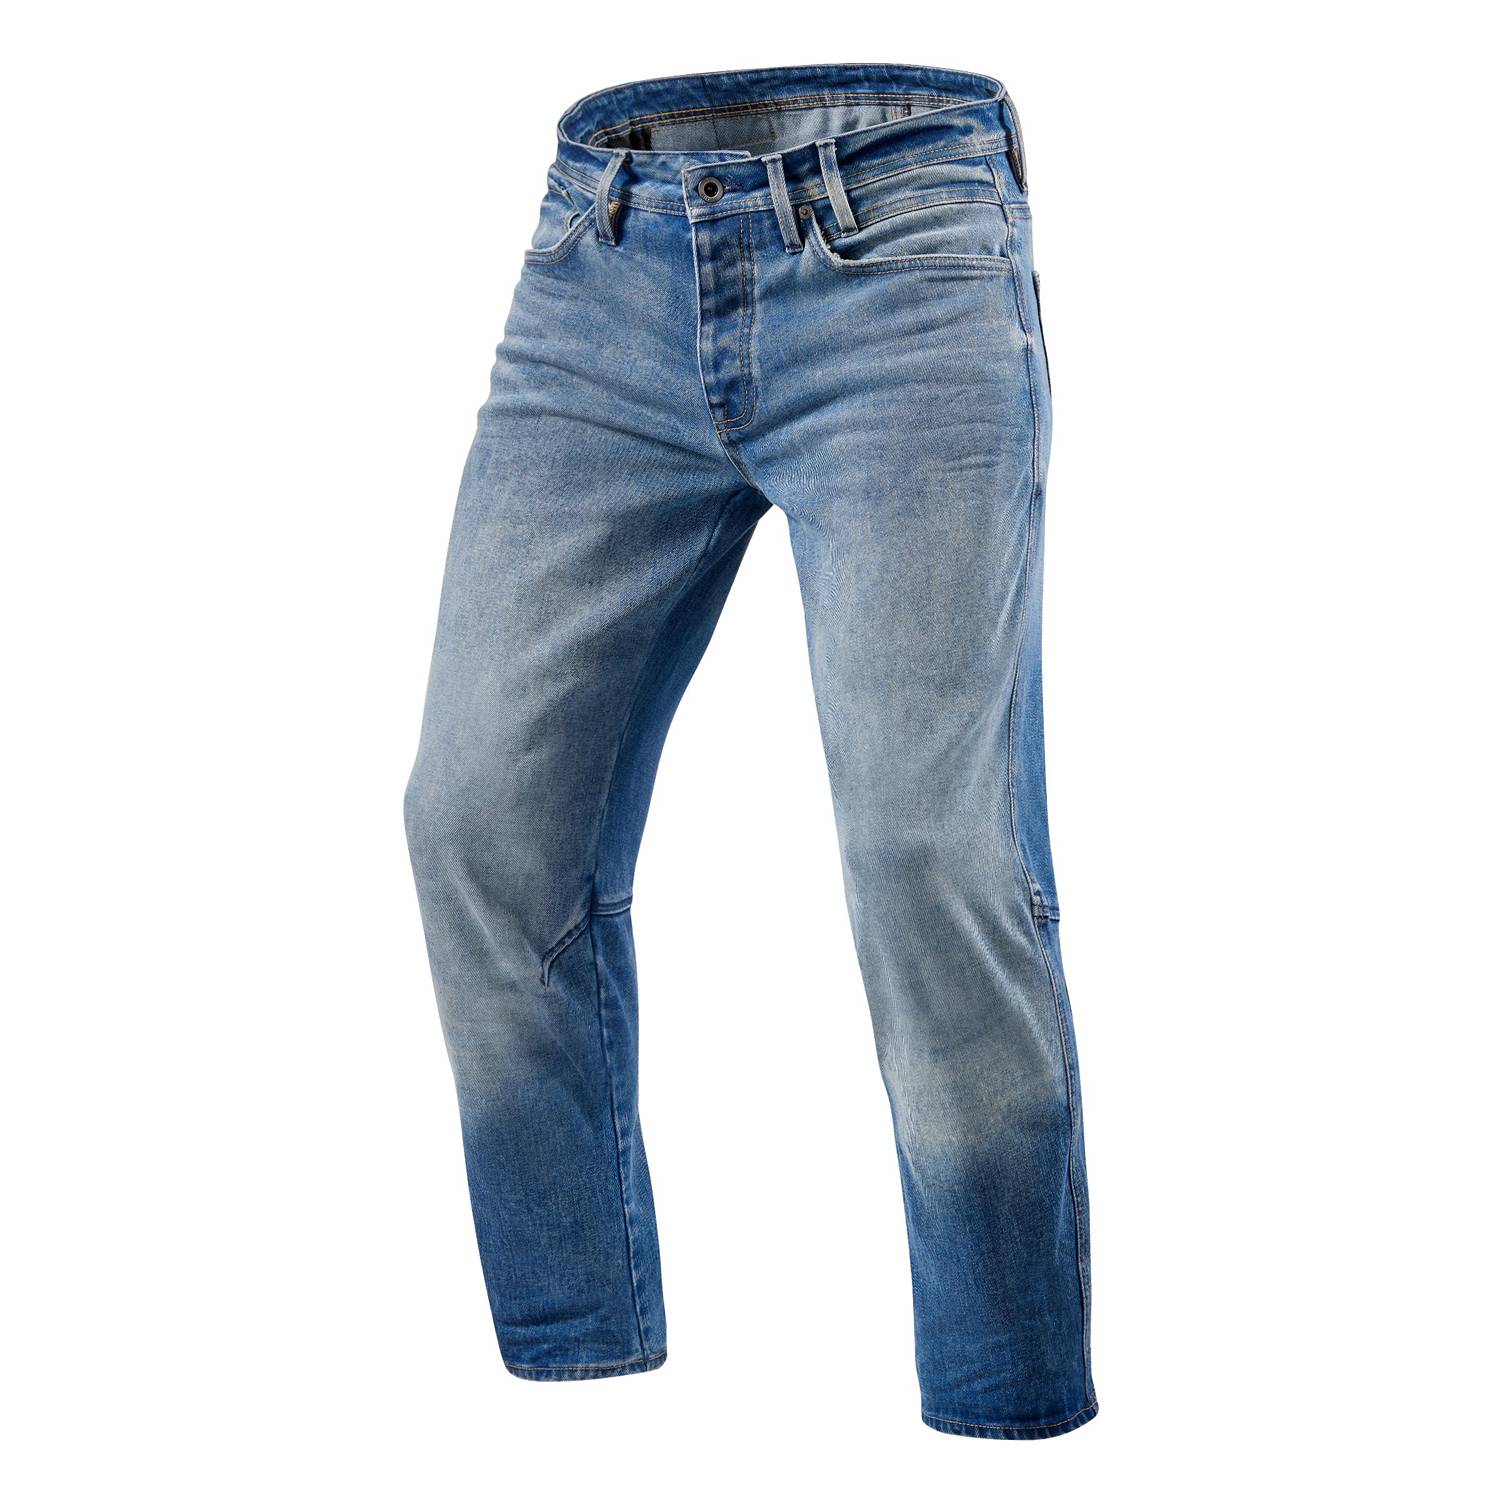 Image of REV'IT! Salt TF Mid Blue Used Motorcycle Jeans Size L34/W32 ID 8700001339063